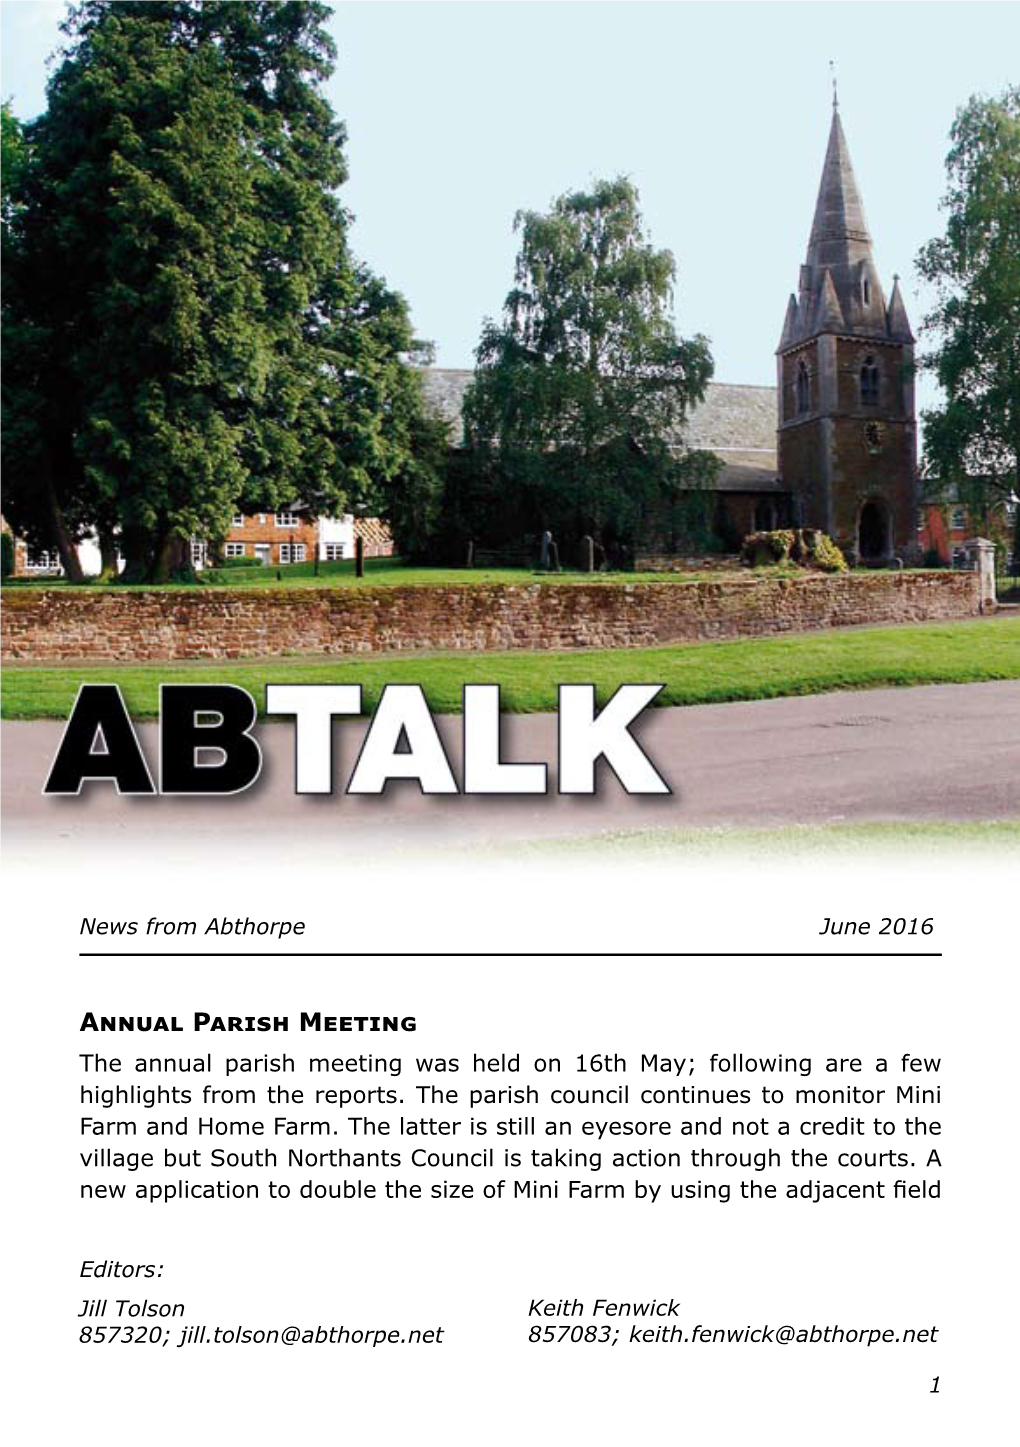 Annual Parish Meeting the Annual Parish Meeting Was Held on 16Th May; Following Are a Few Highlights from the Reports